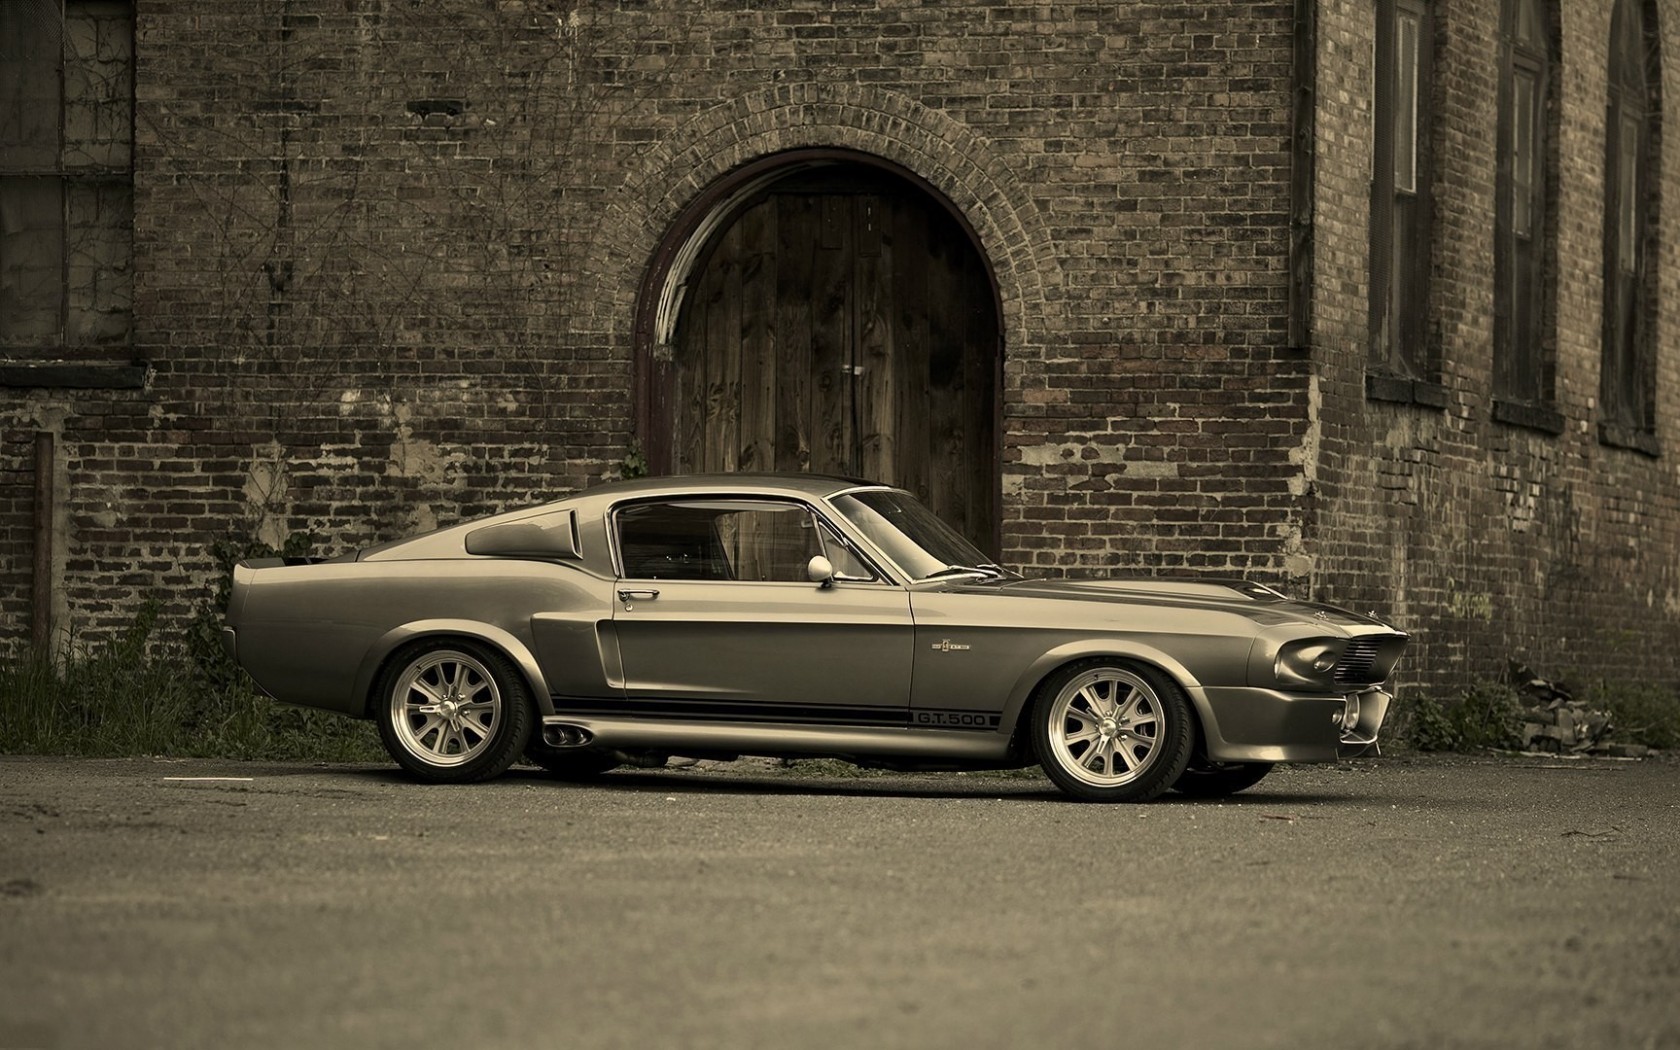 Ford Mustang Shelby Gt500 Wallpaper Anh Photo